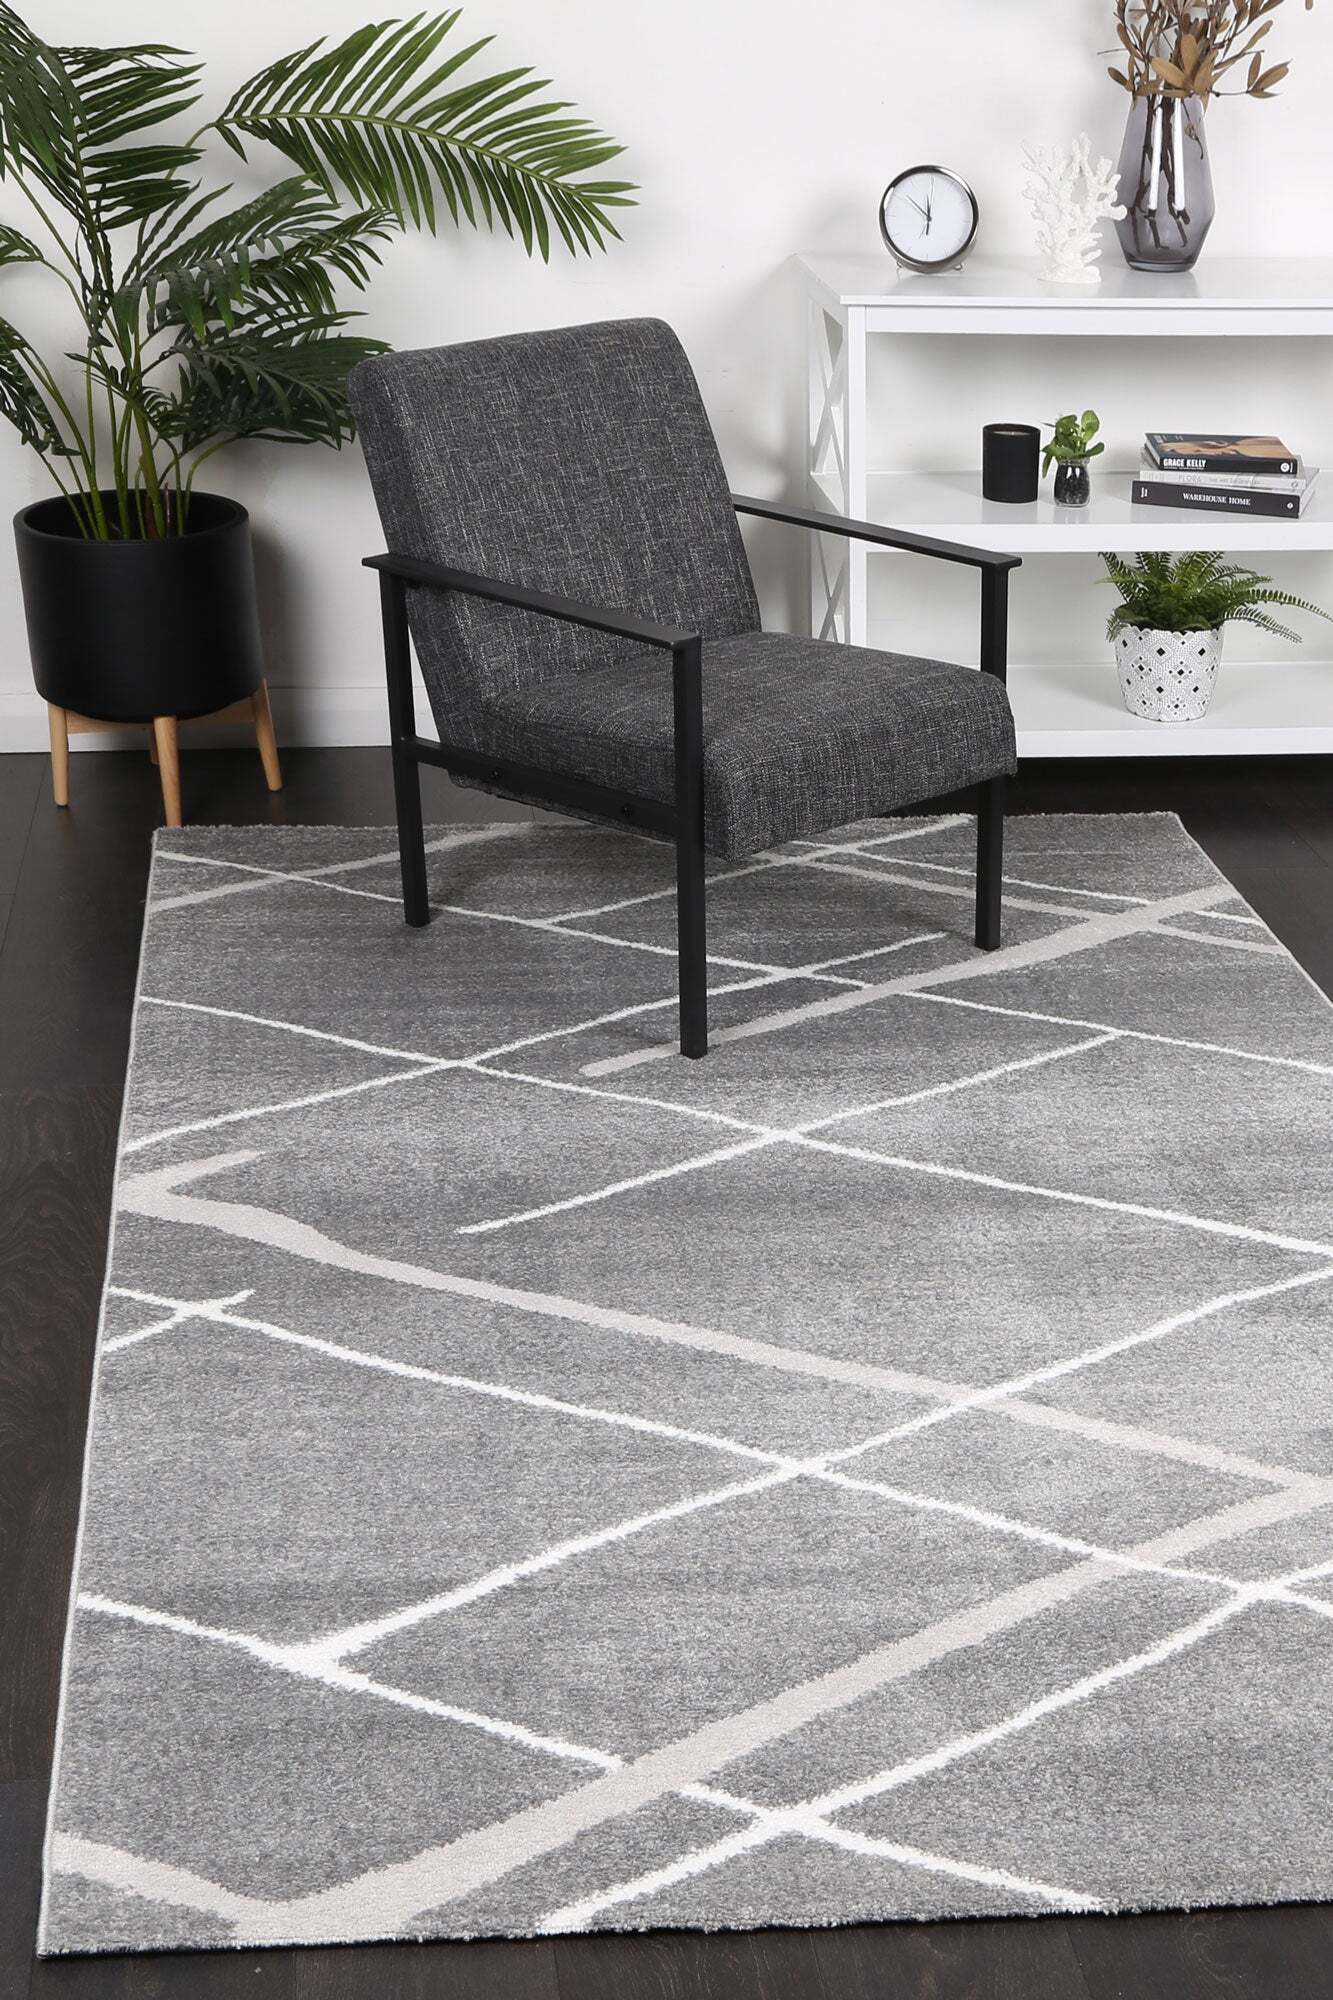 Kelly Striped Abstract Rug(Size 150 x 80cm)